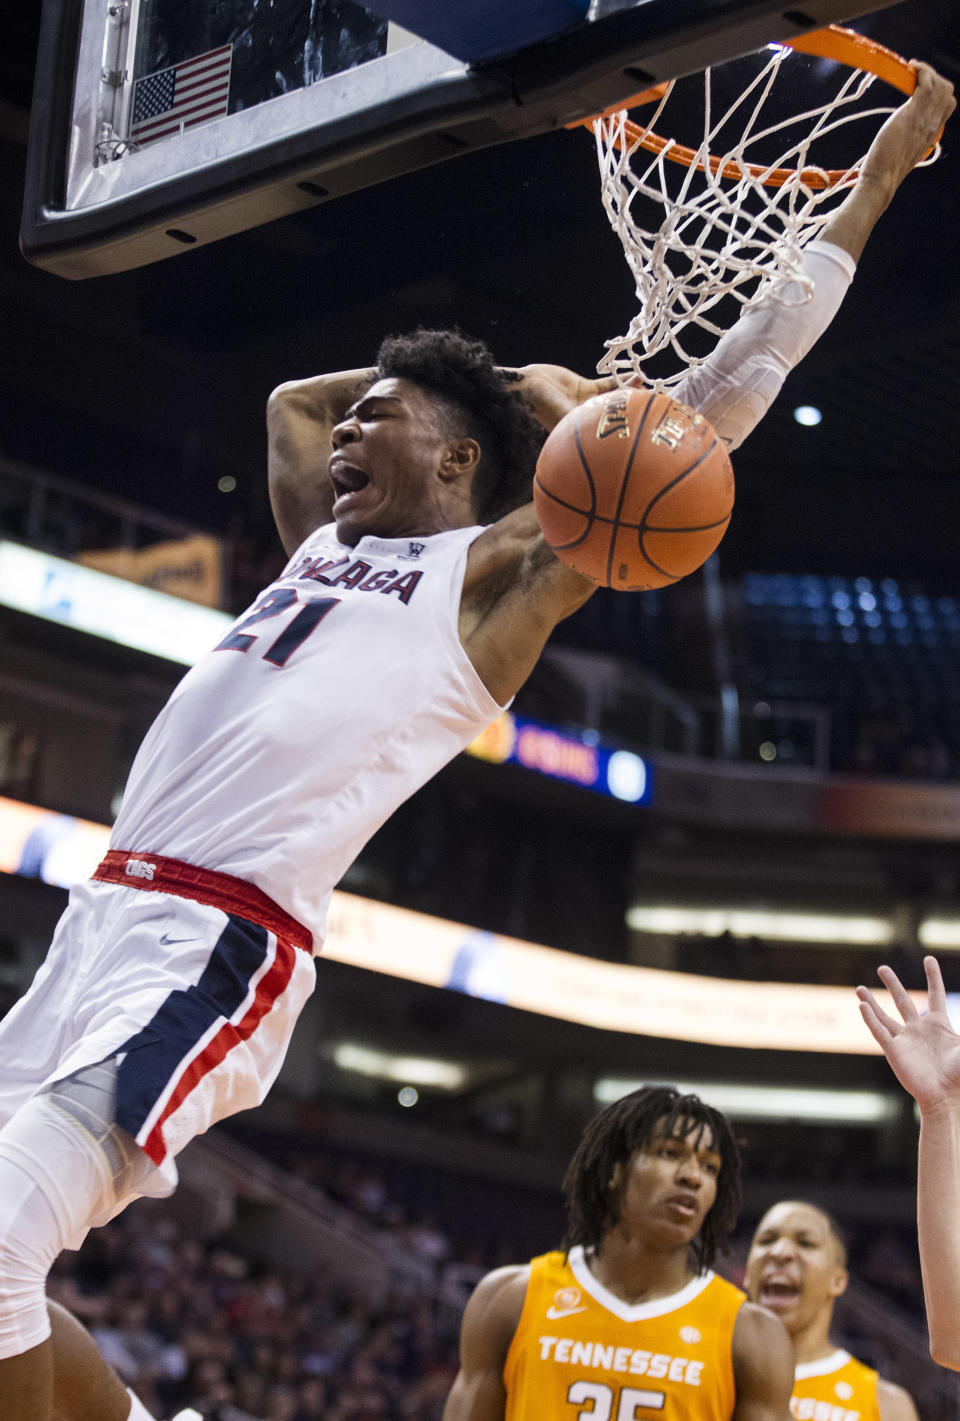 Gonzaga's Rui Hachimura (21) slams one home against Tennessee during the first half of an NCAA college basketball game Sunday, Dec. 9, 2018, in Phoenix. (AP Photo/Darryl Webb)